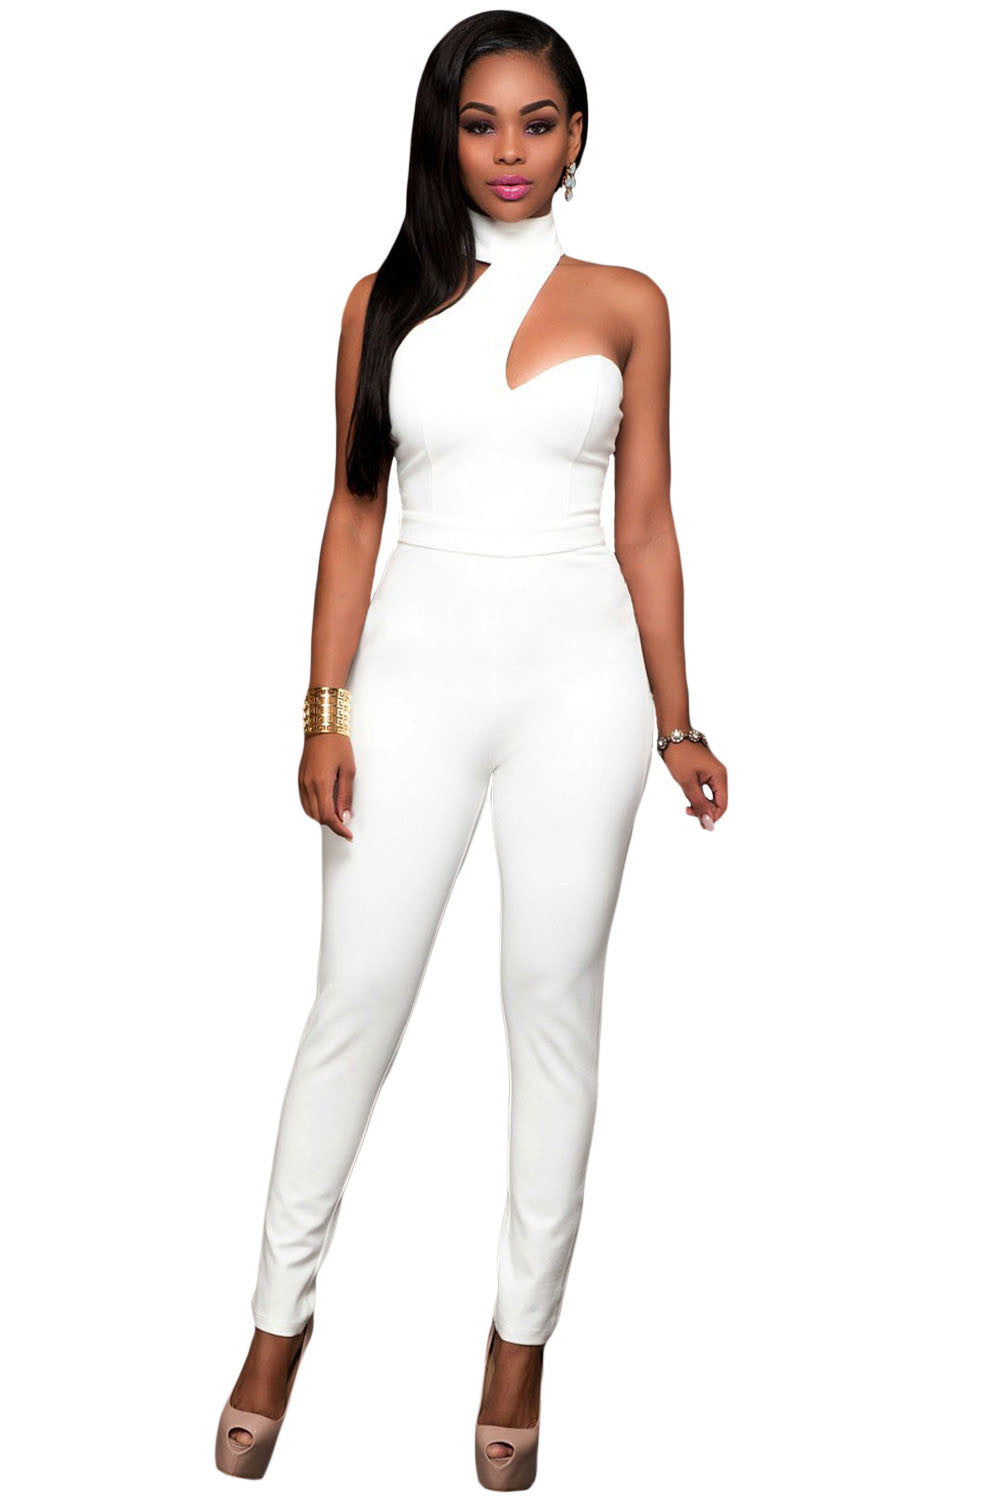 Aayomet Women'S Jumpsuits Women's Sleeveless Backless Bandage O Neck Long  Sleeve Jumpsuit Rompers Bodysuit Catsuit Sport,White XL